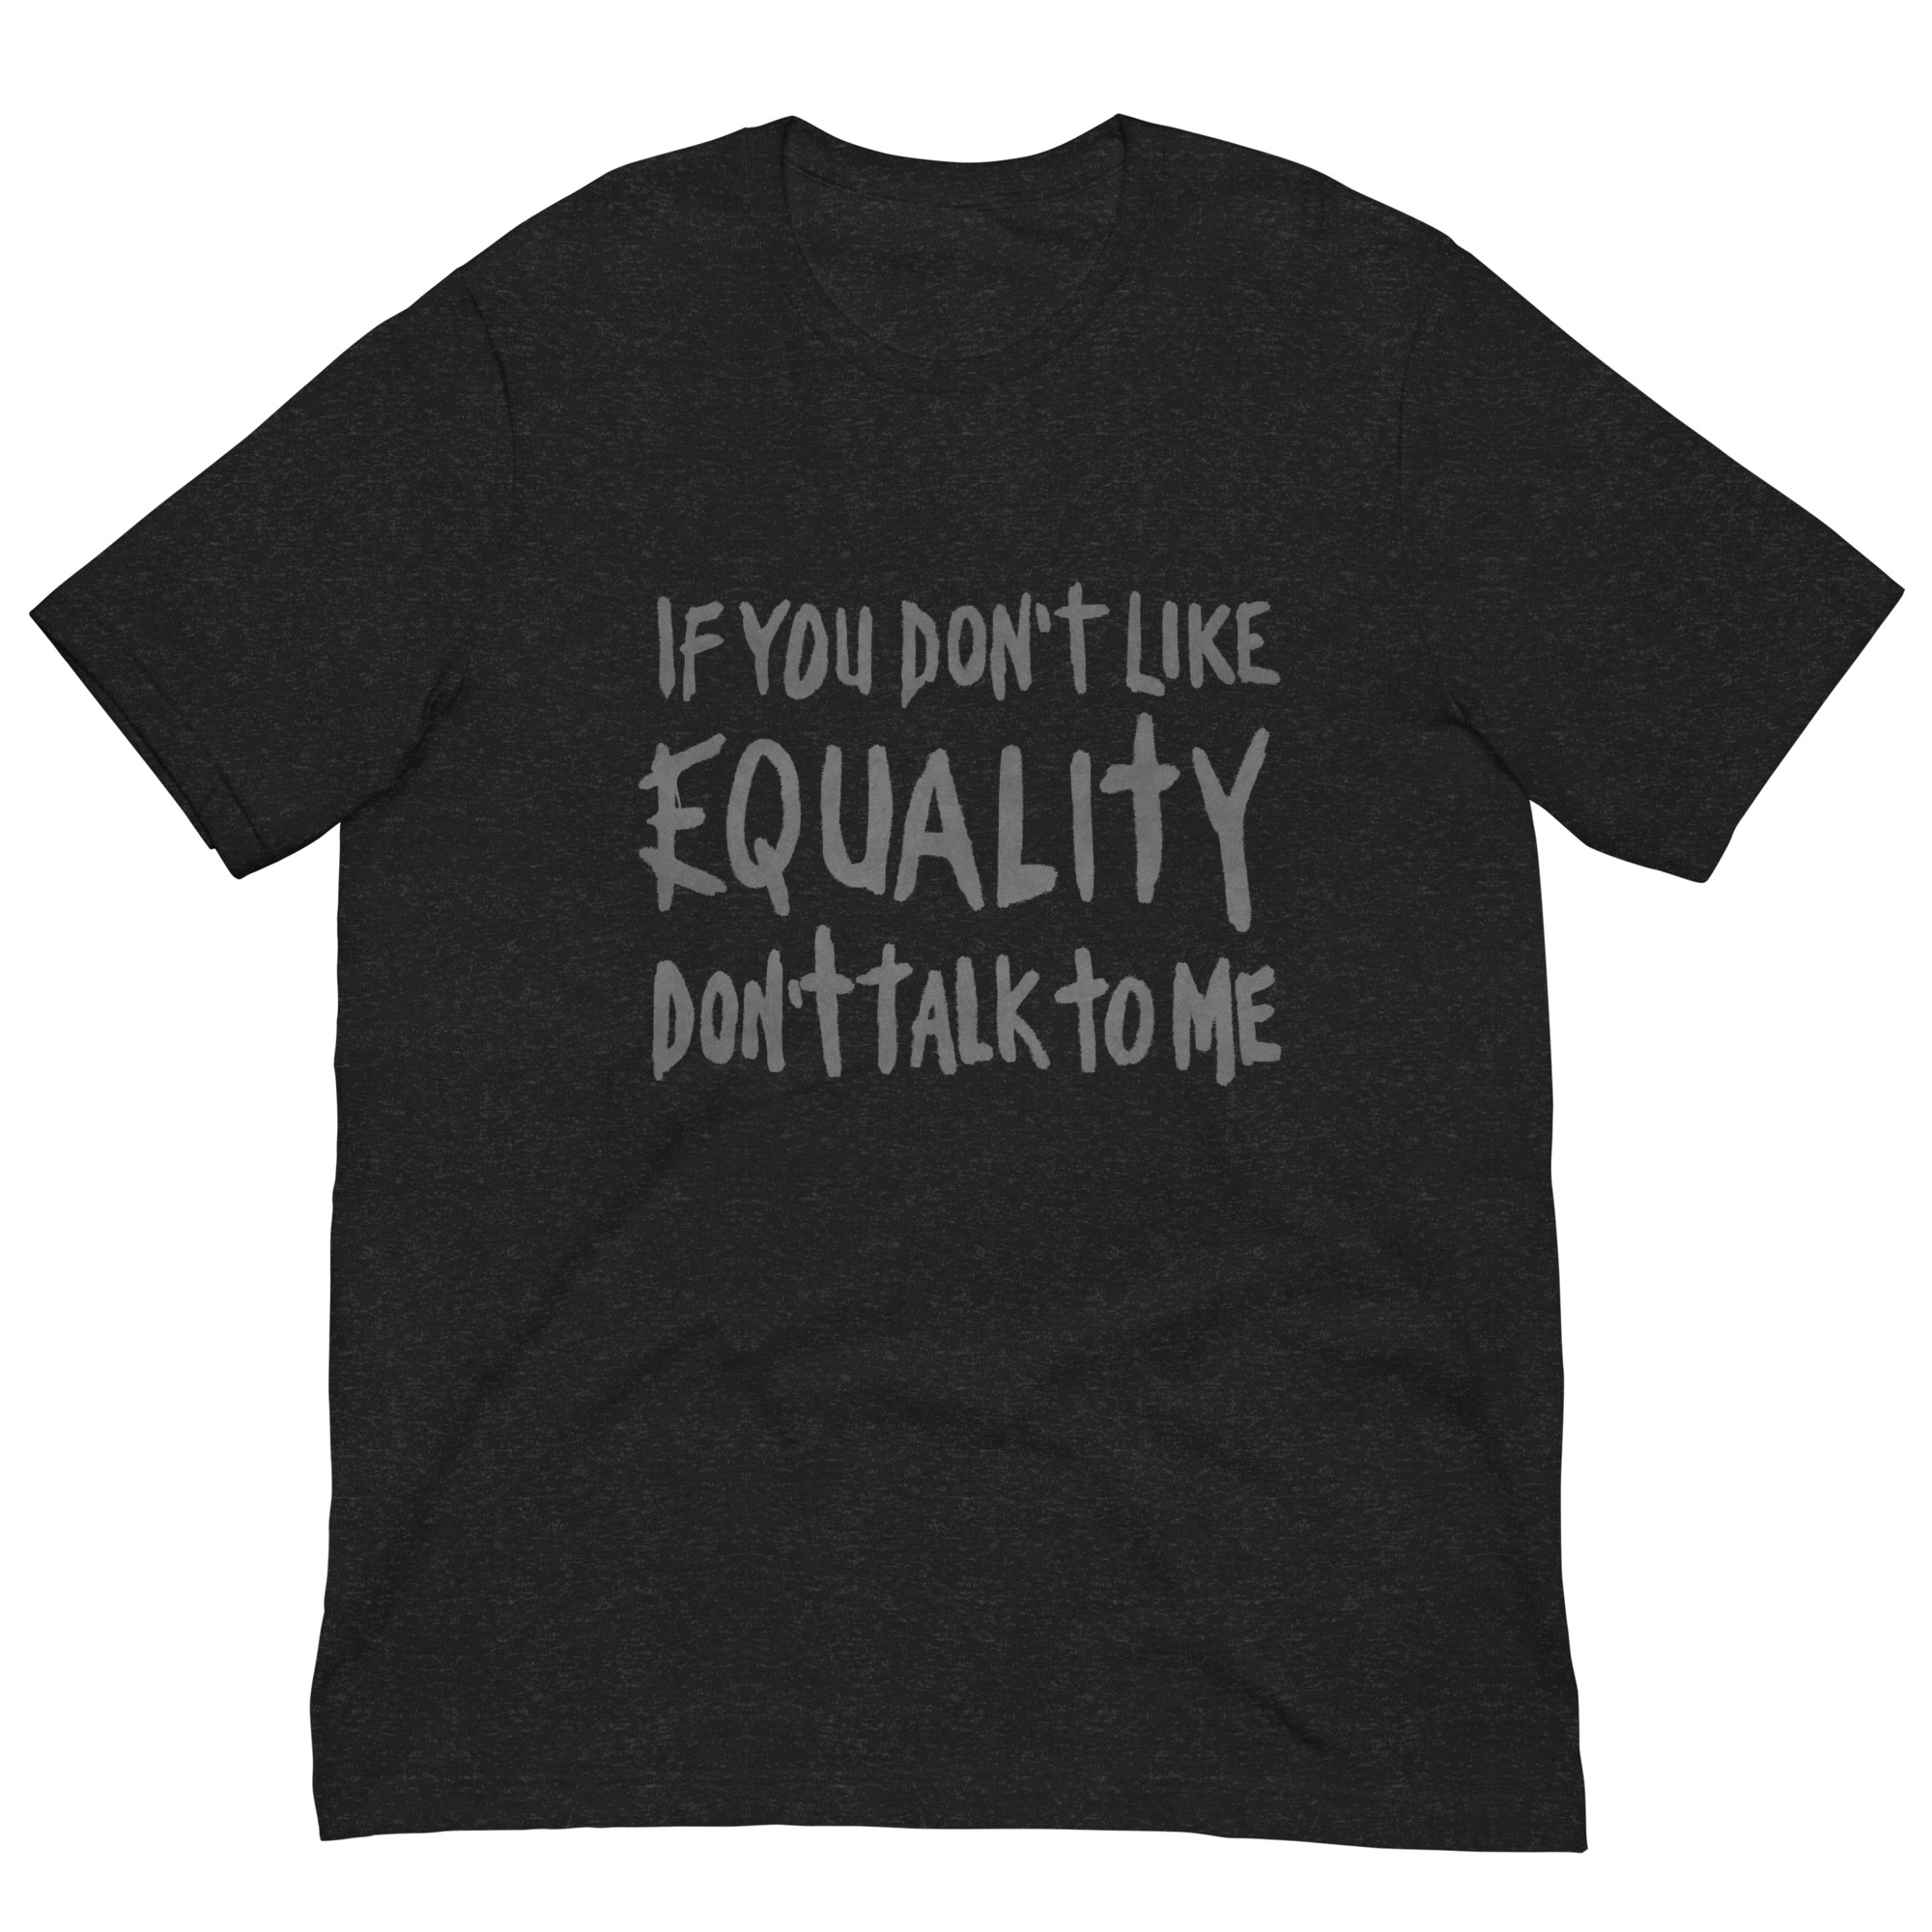 Featured image for “If you don’t like Equality don’t talk to me - Unisex Bella + Canvas t-shirt”